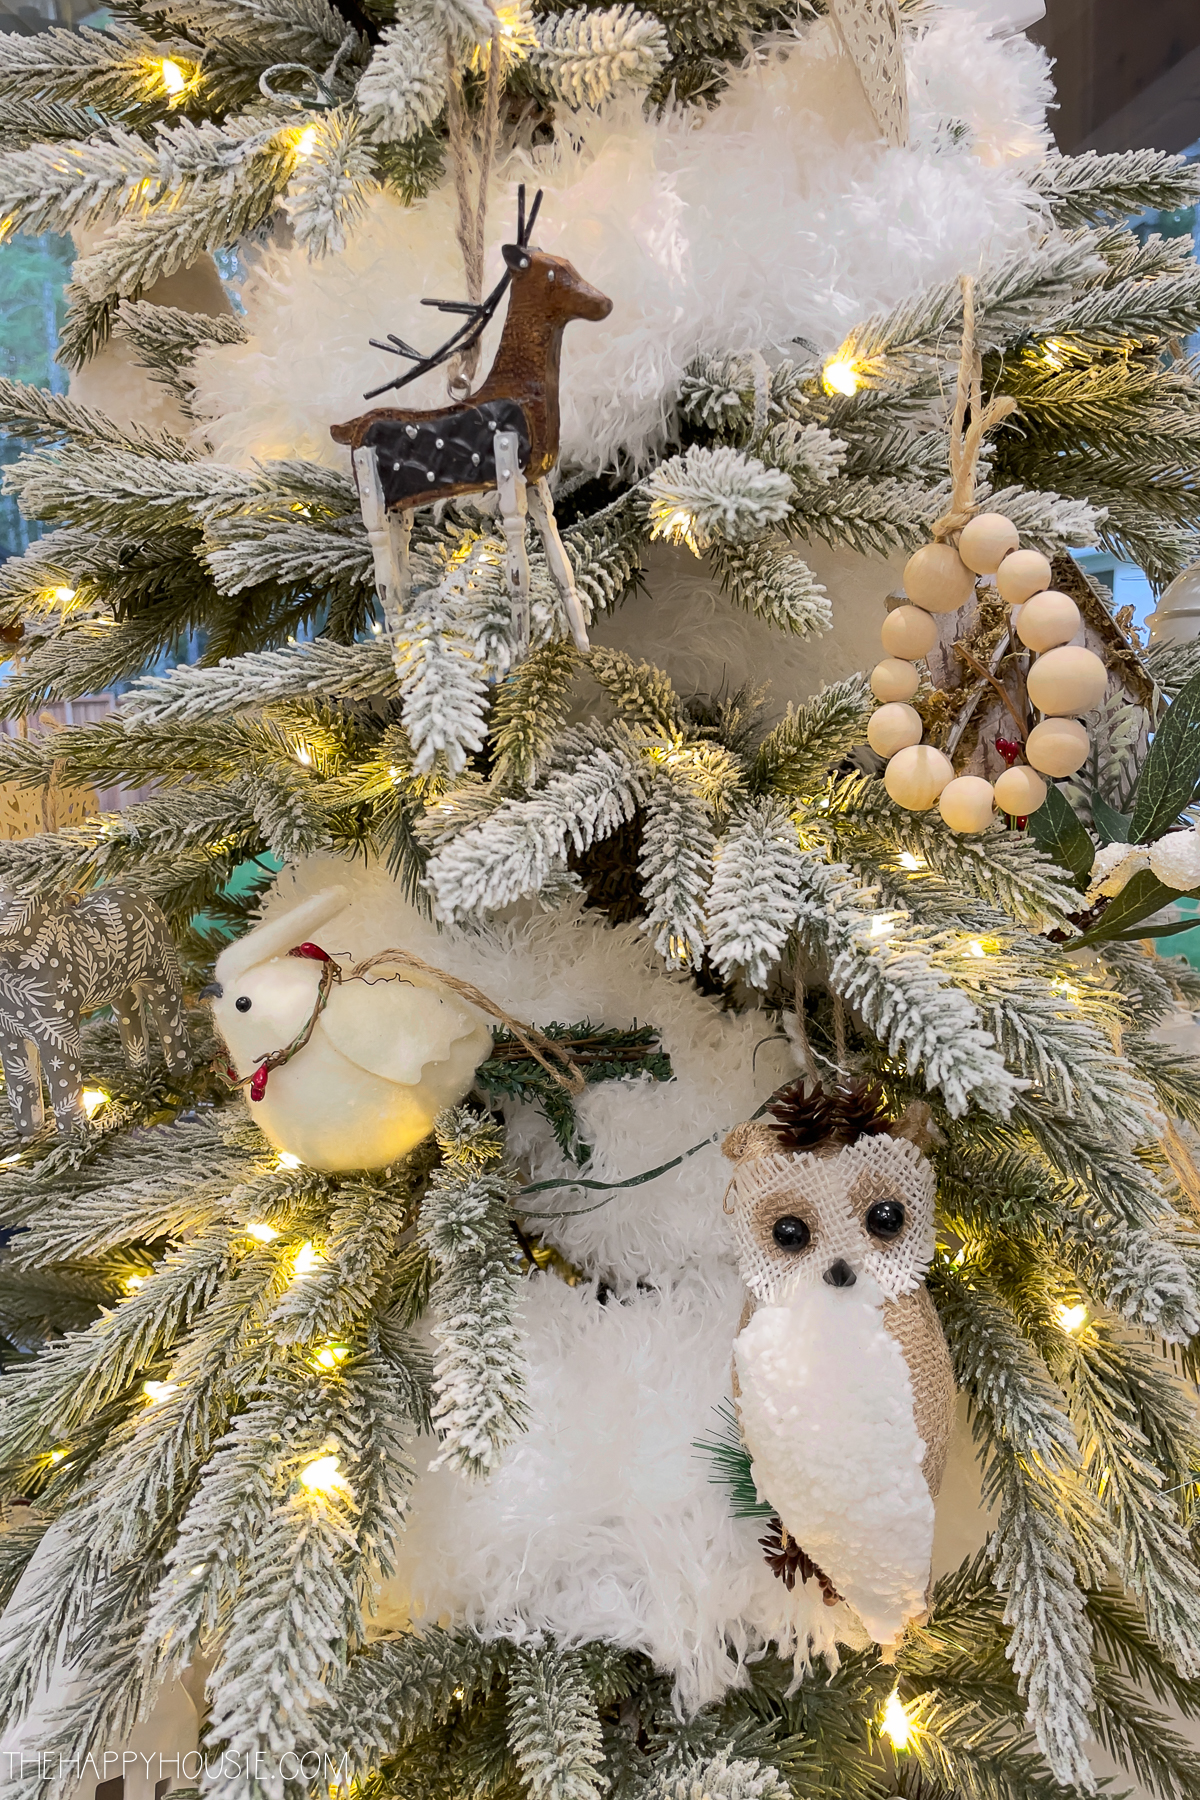 A wooden deer on the tree.